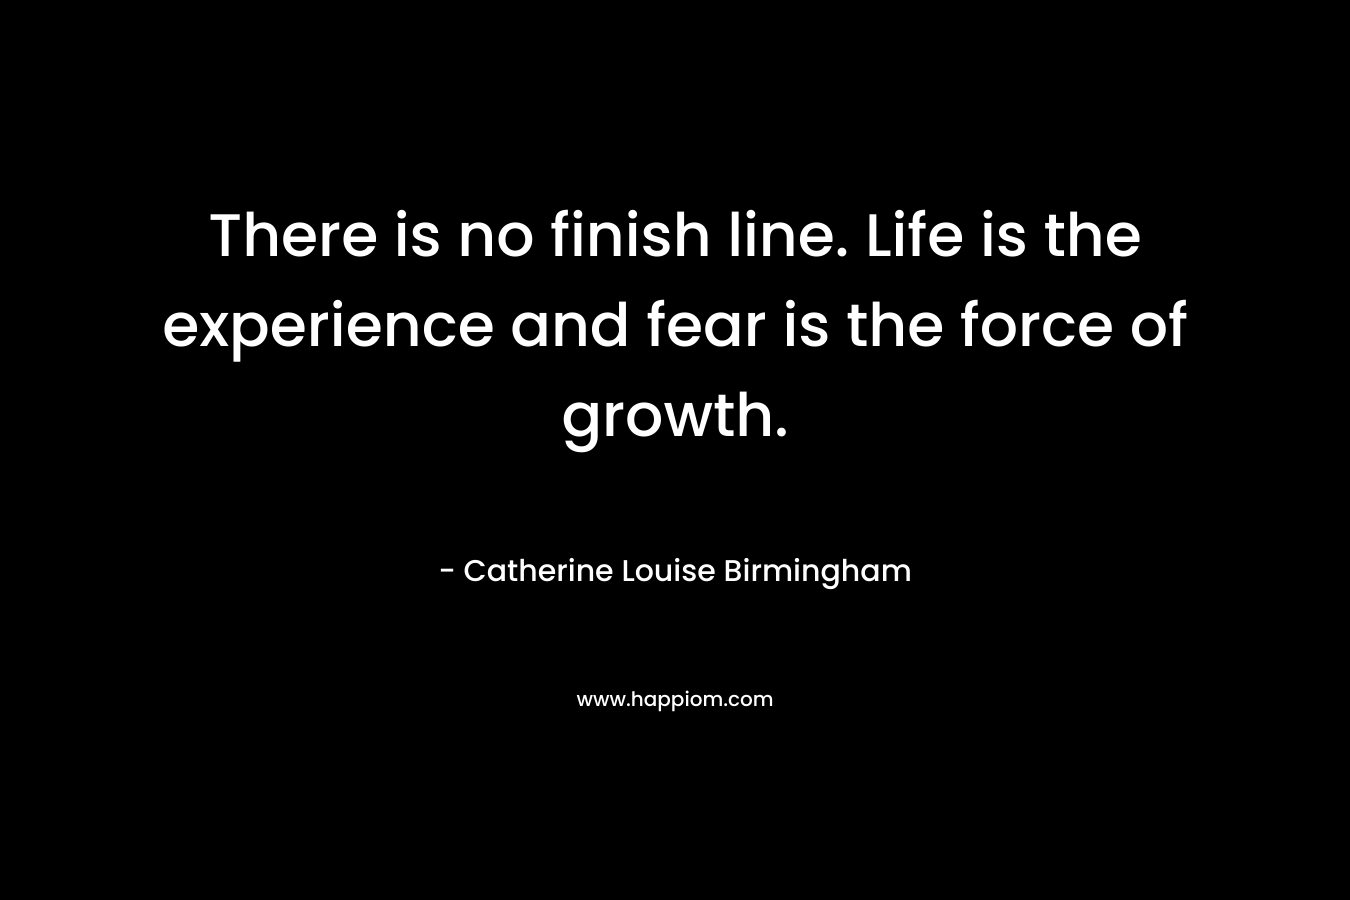 There is no finish line. Life is the experience and fear is the force of growth. – Catherine Louise Birmingham